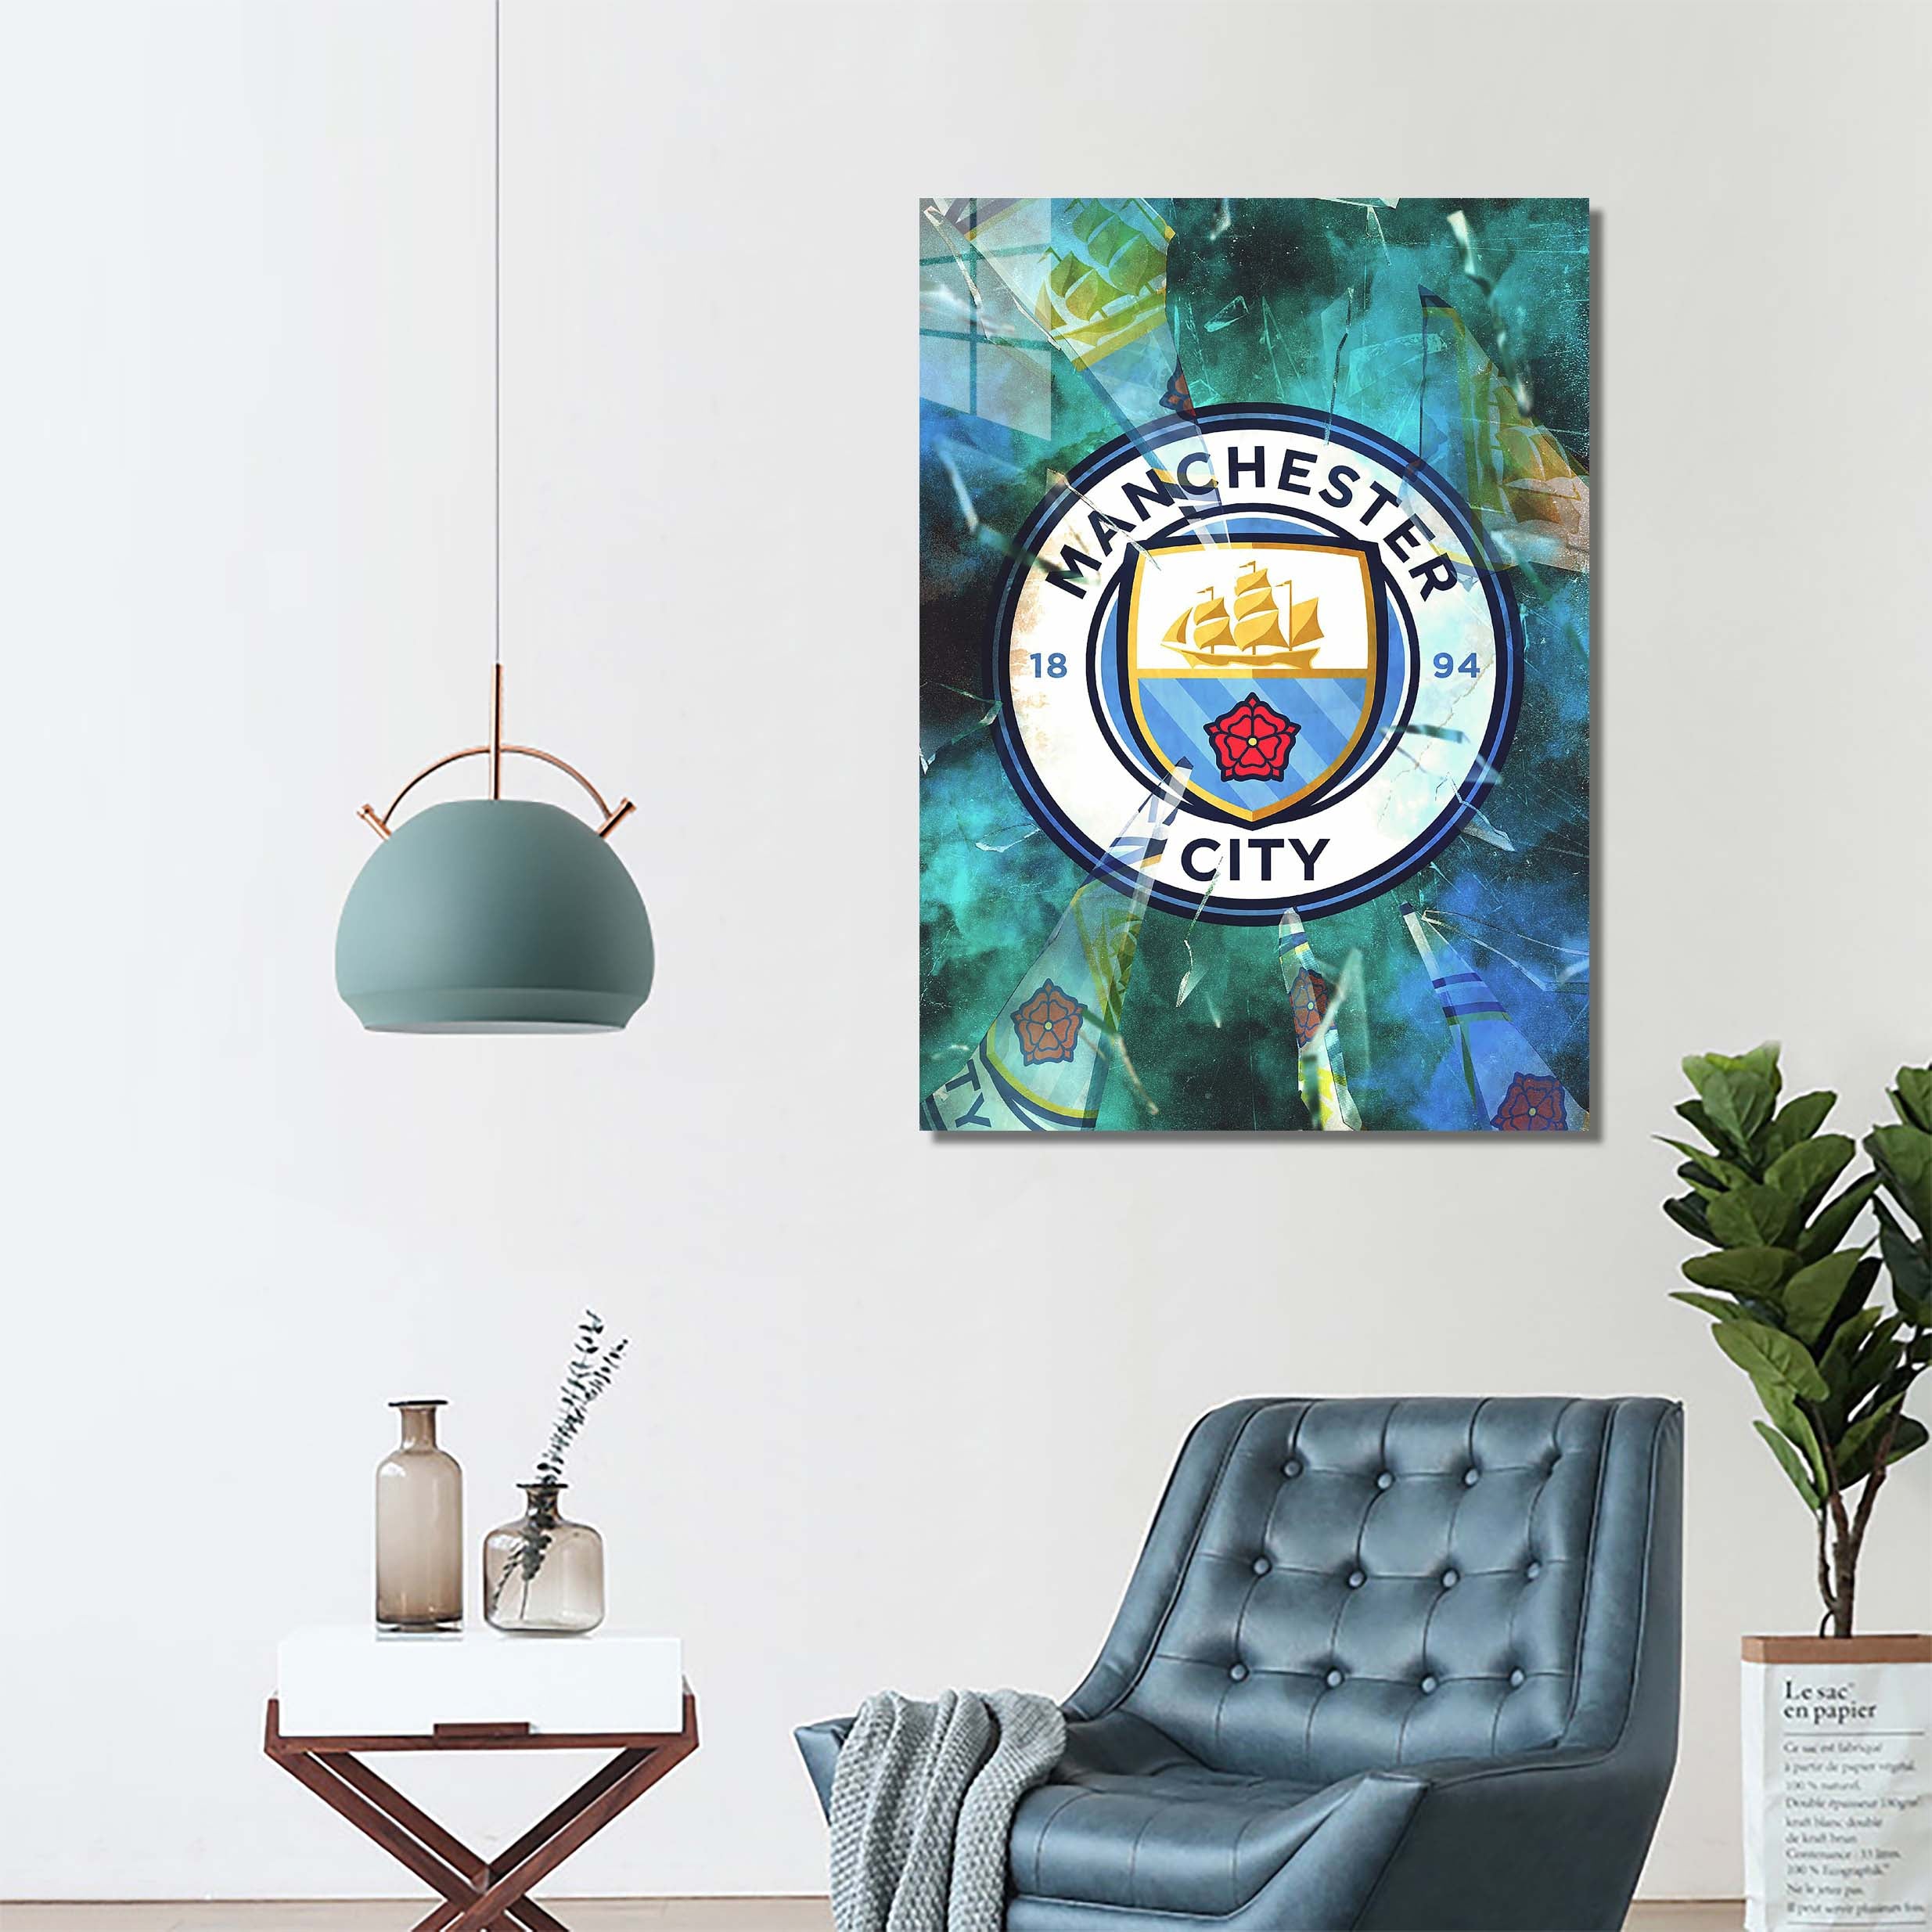 Manchester City-designed by @Hoang Van Thuan